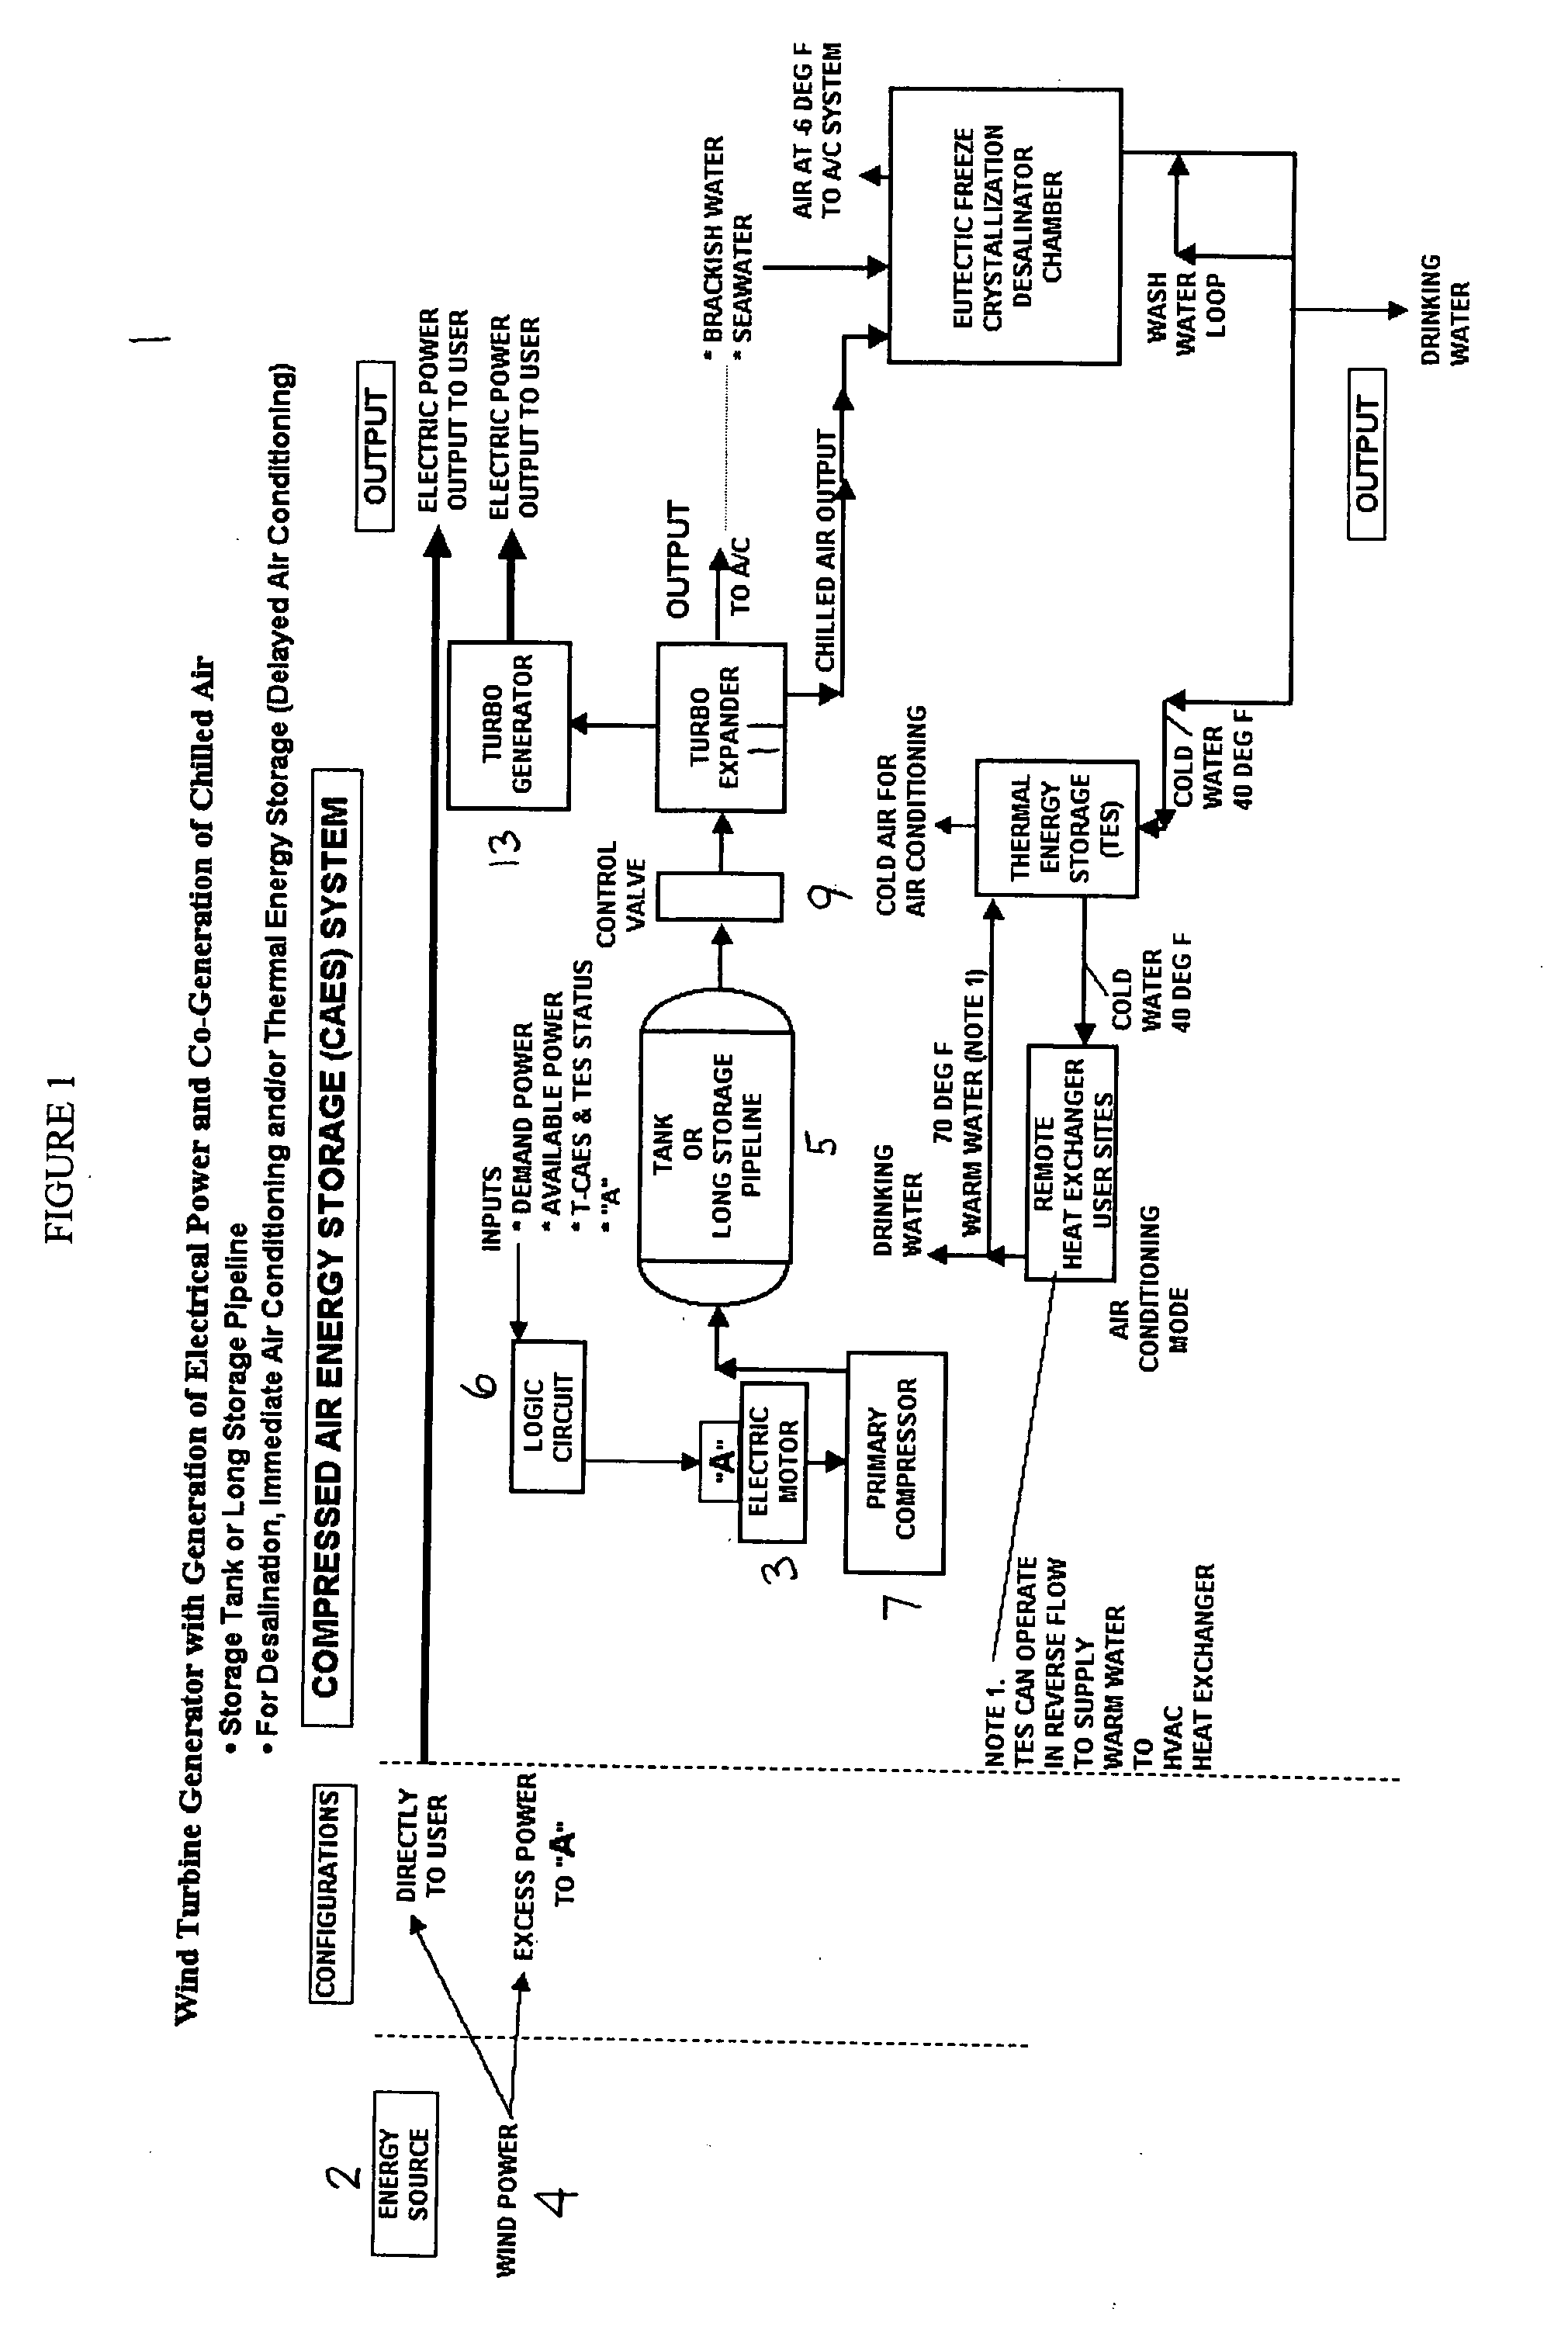 Desalination method and system using compressed air energy systems